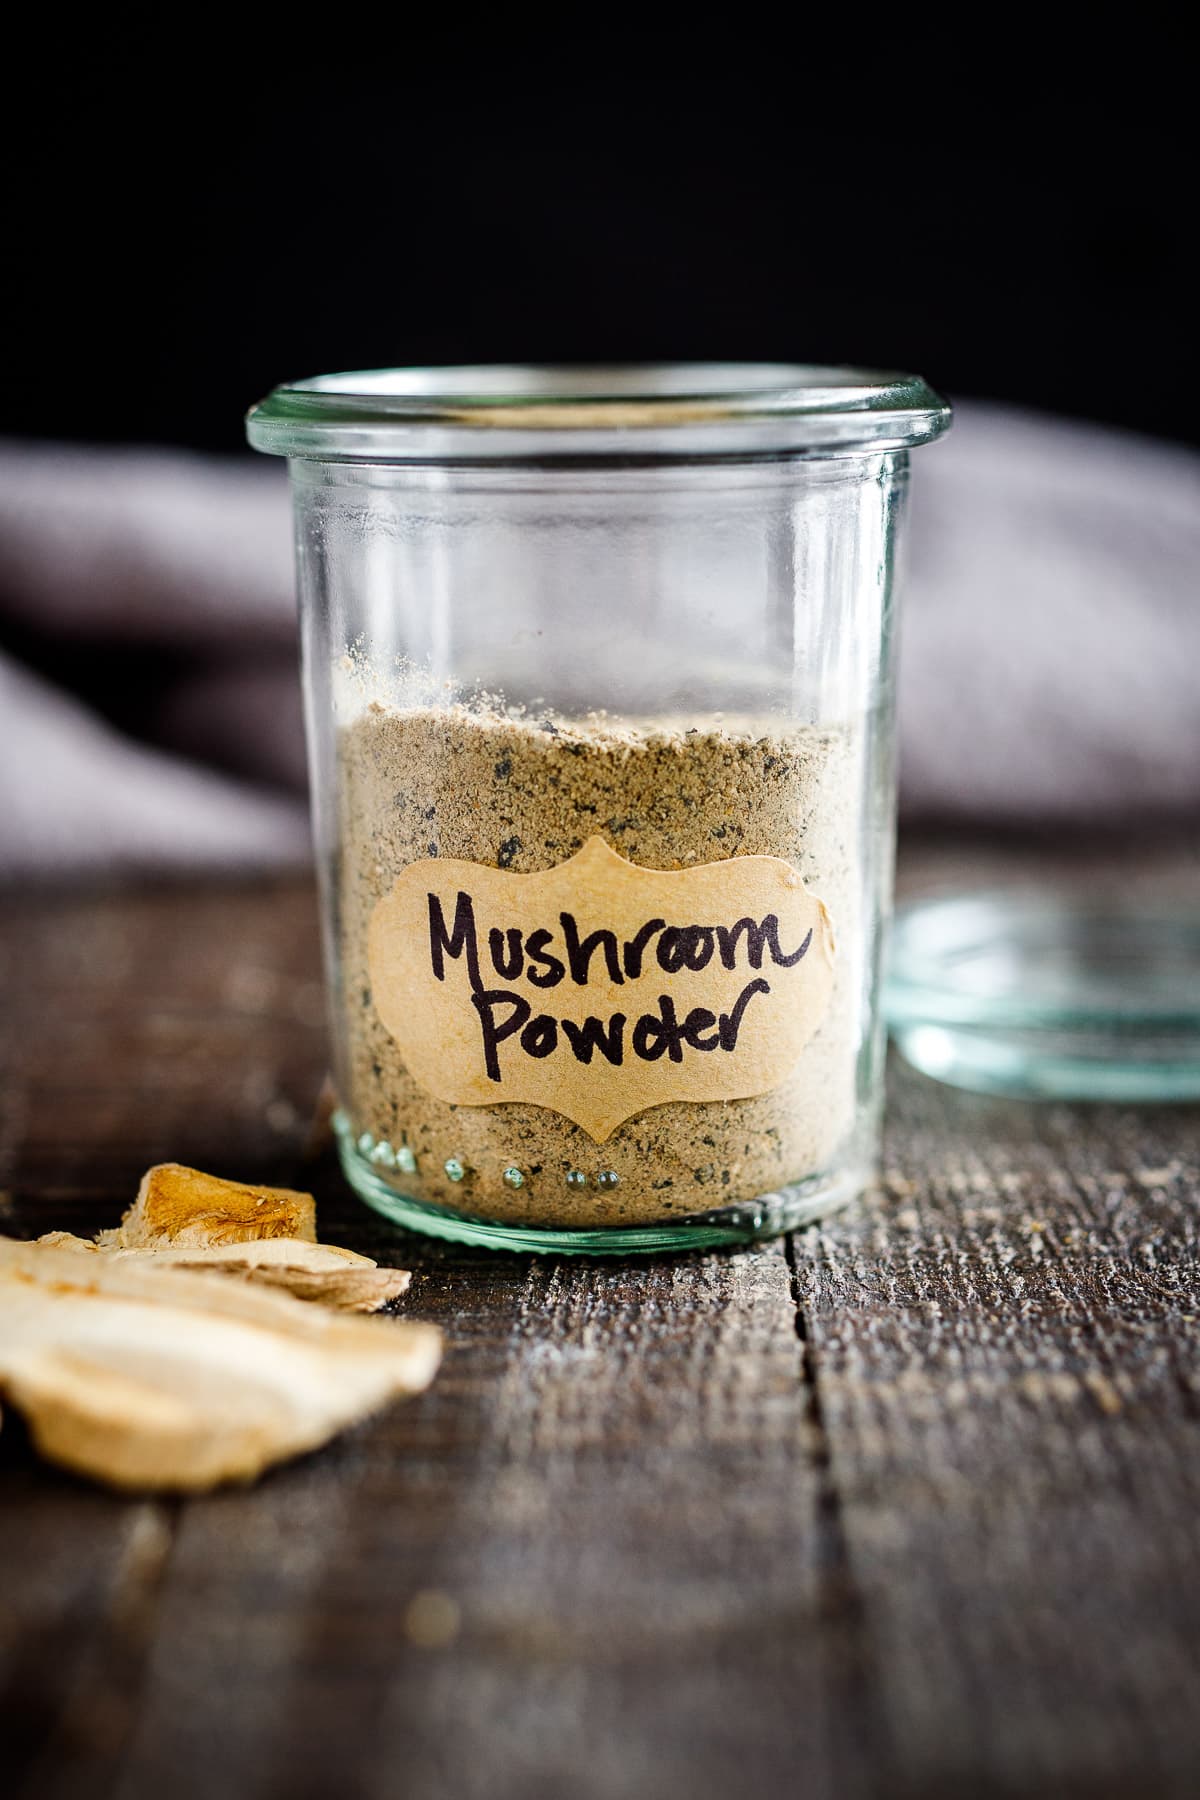 Easy to make in under 10 minutes, this healing, flavor boosting Mushroom Powder has many uses in the kitchen adding delicious umami flavor to soups, stews, stir-fries, tacos, eggs, beans, and sauces!